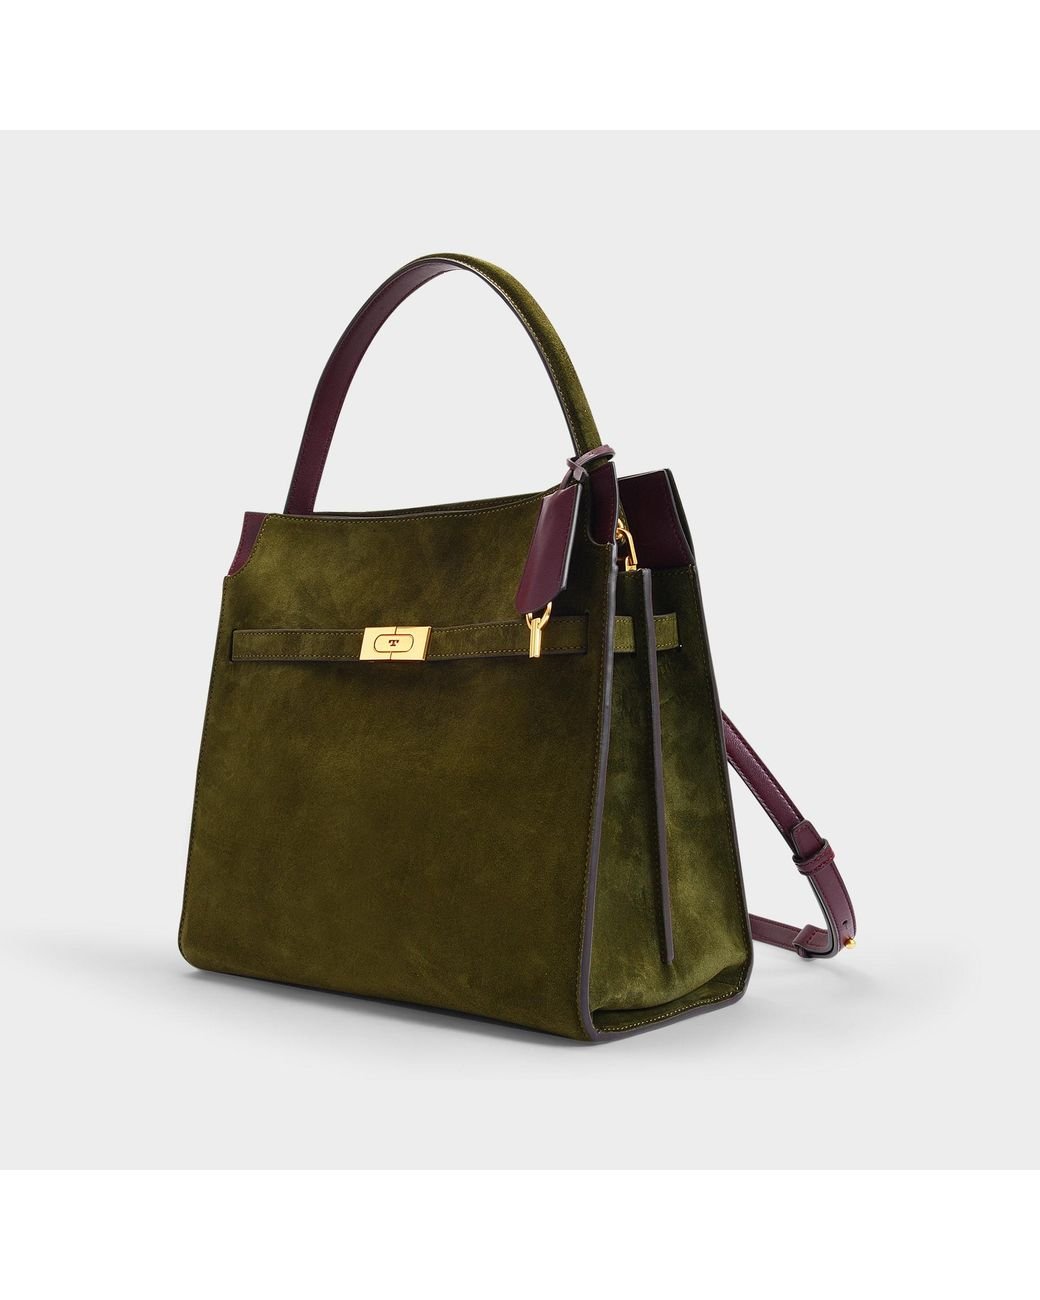 Tory Burch Lee Radziwill Double Bag in Green | Lyst